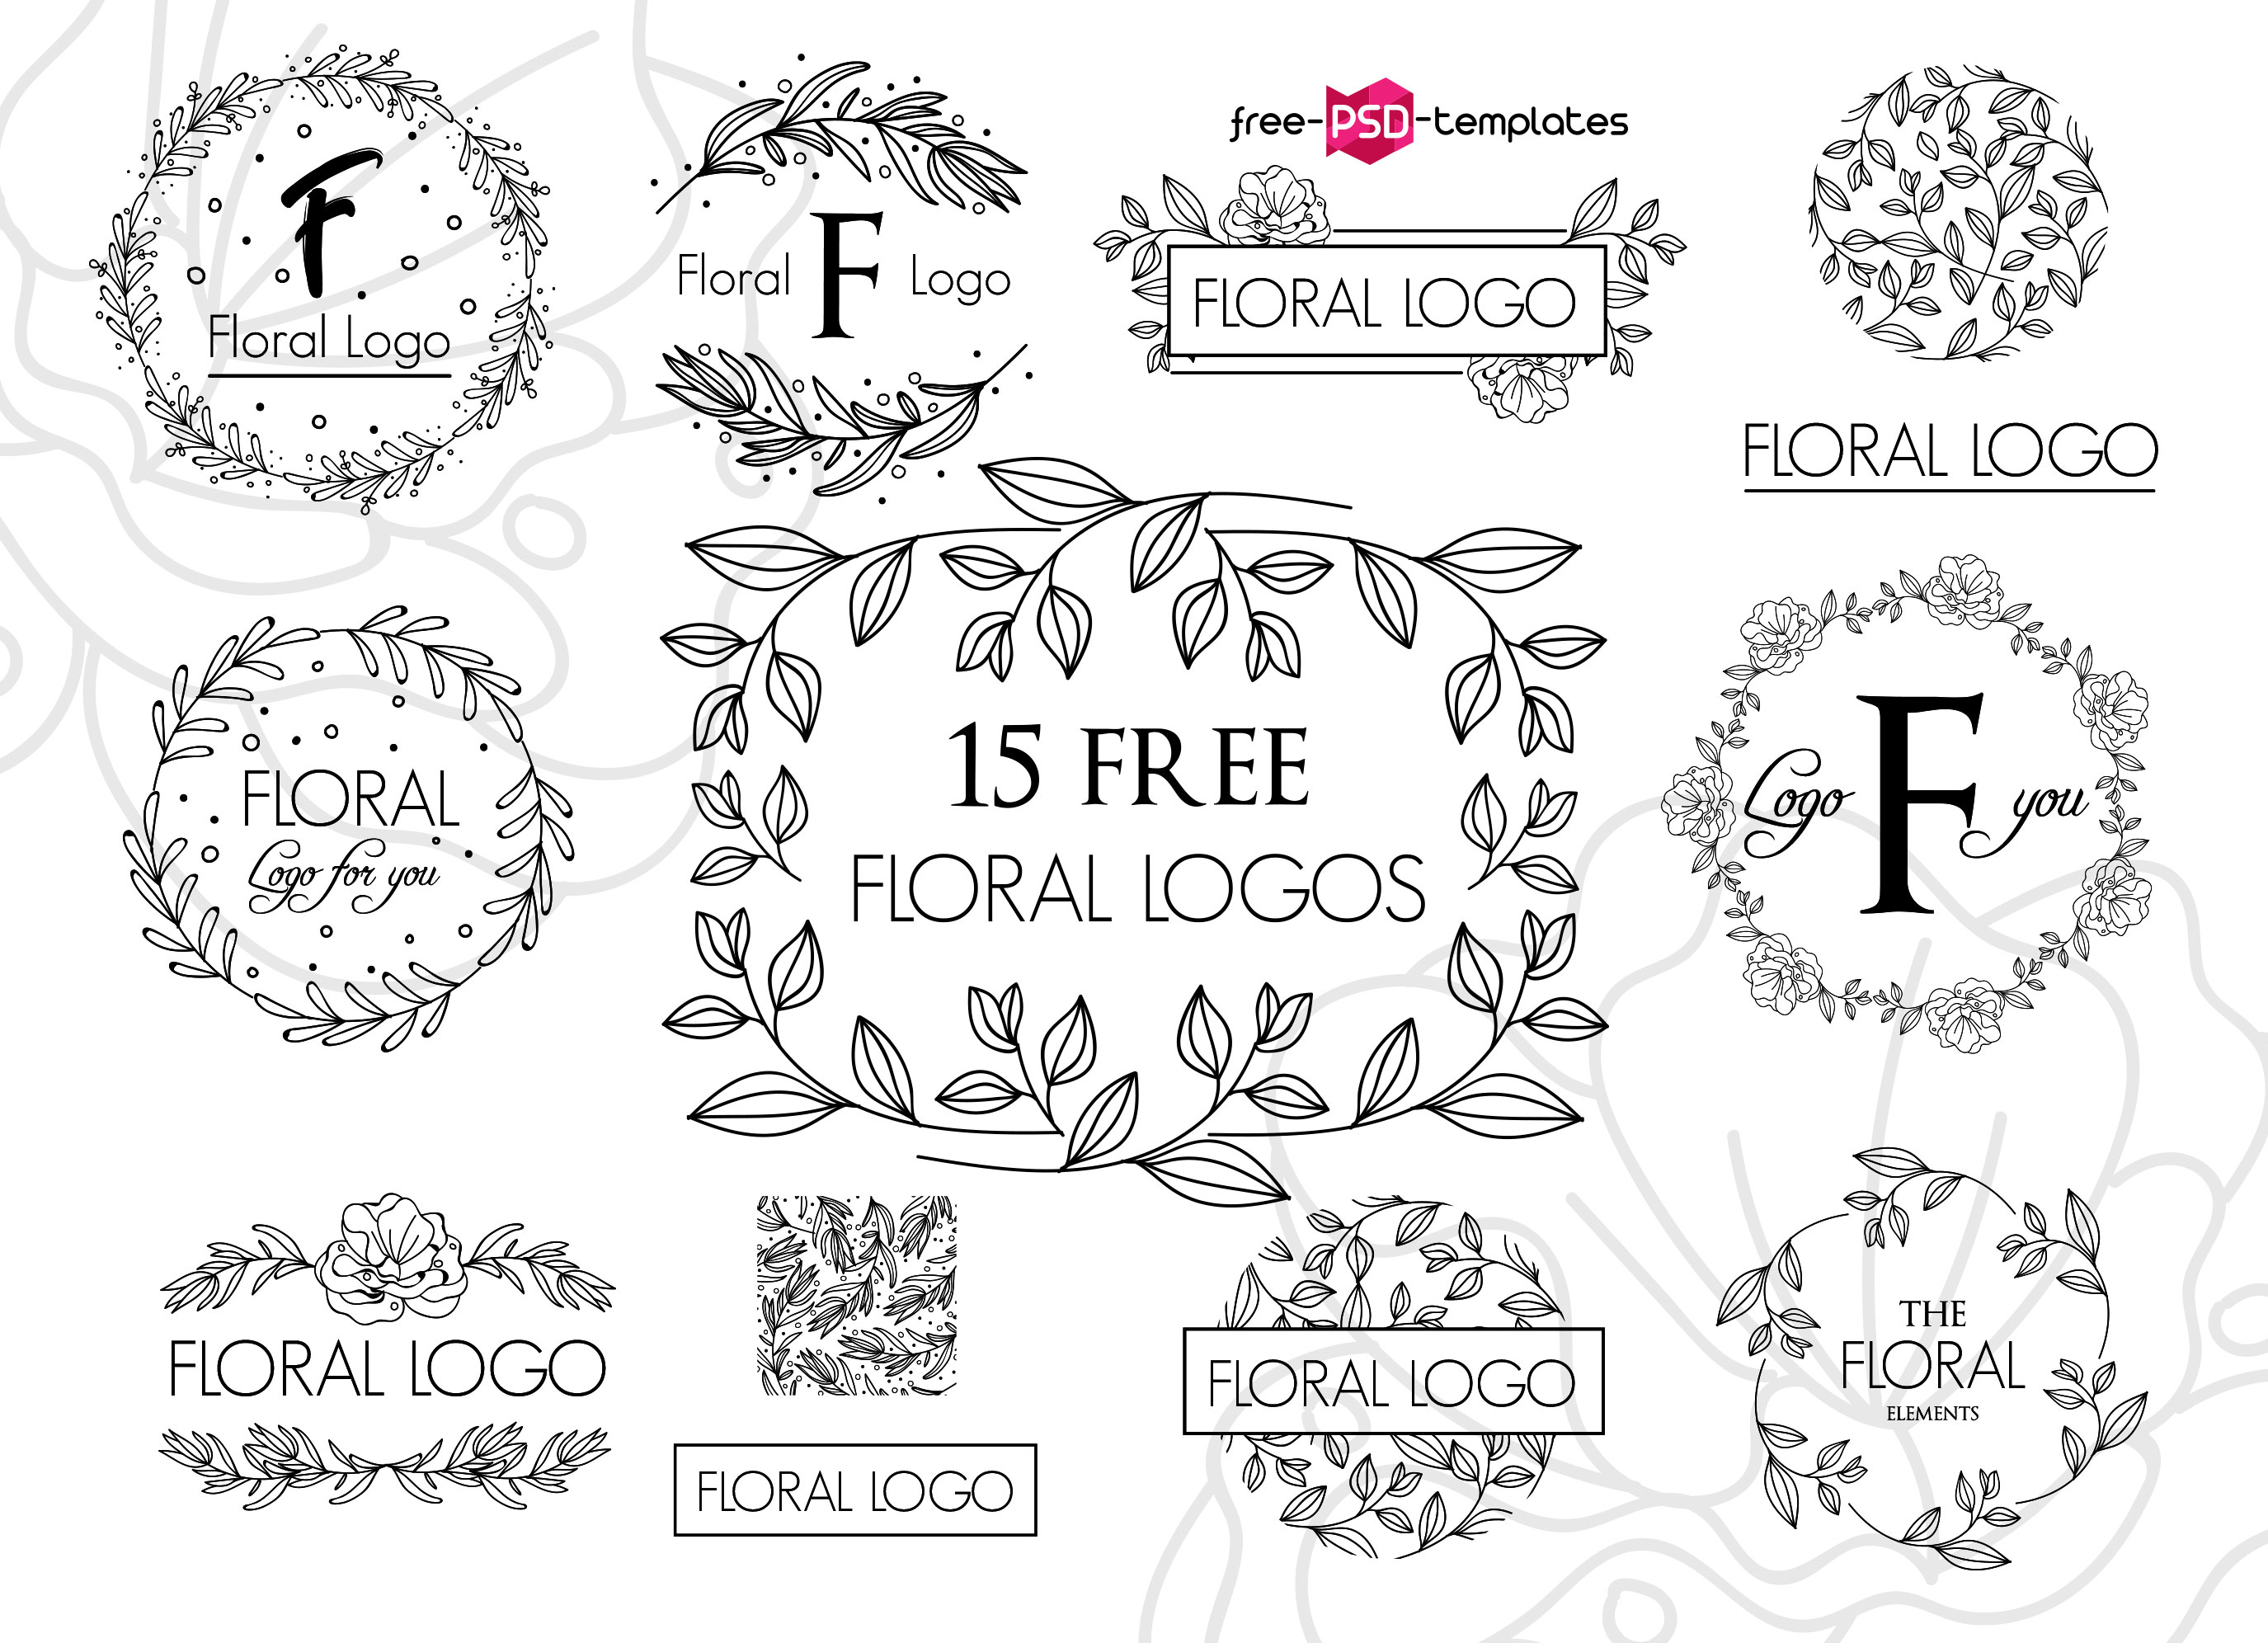 Download 15 Free Vector Floral Logos | Free PSD Templates